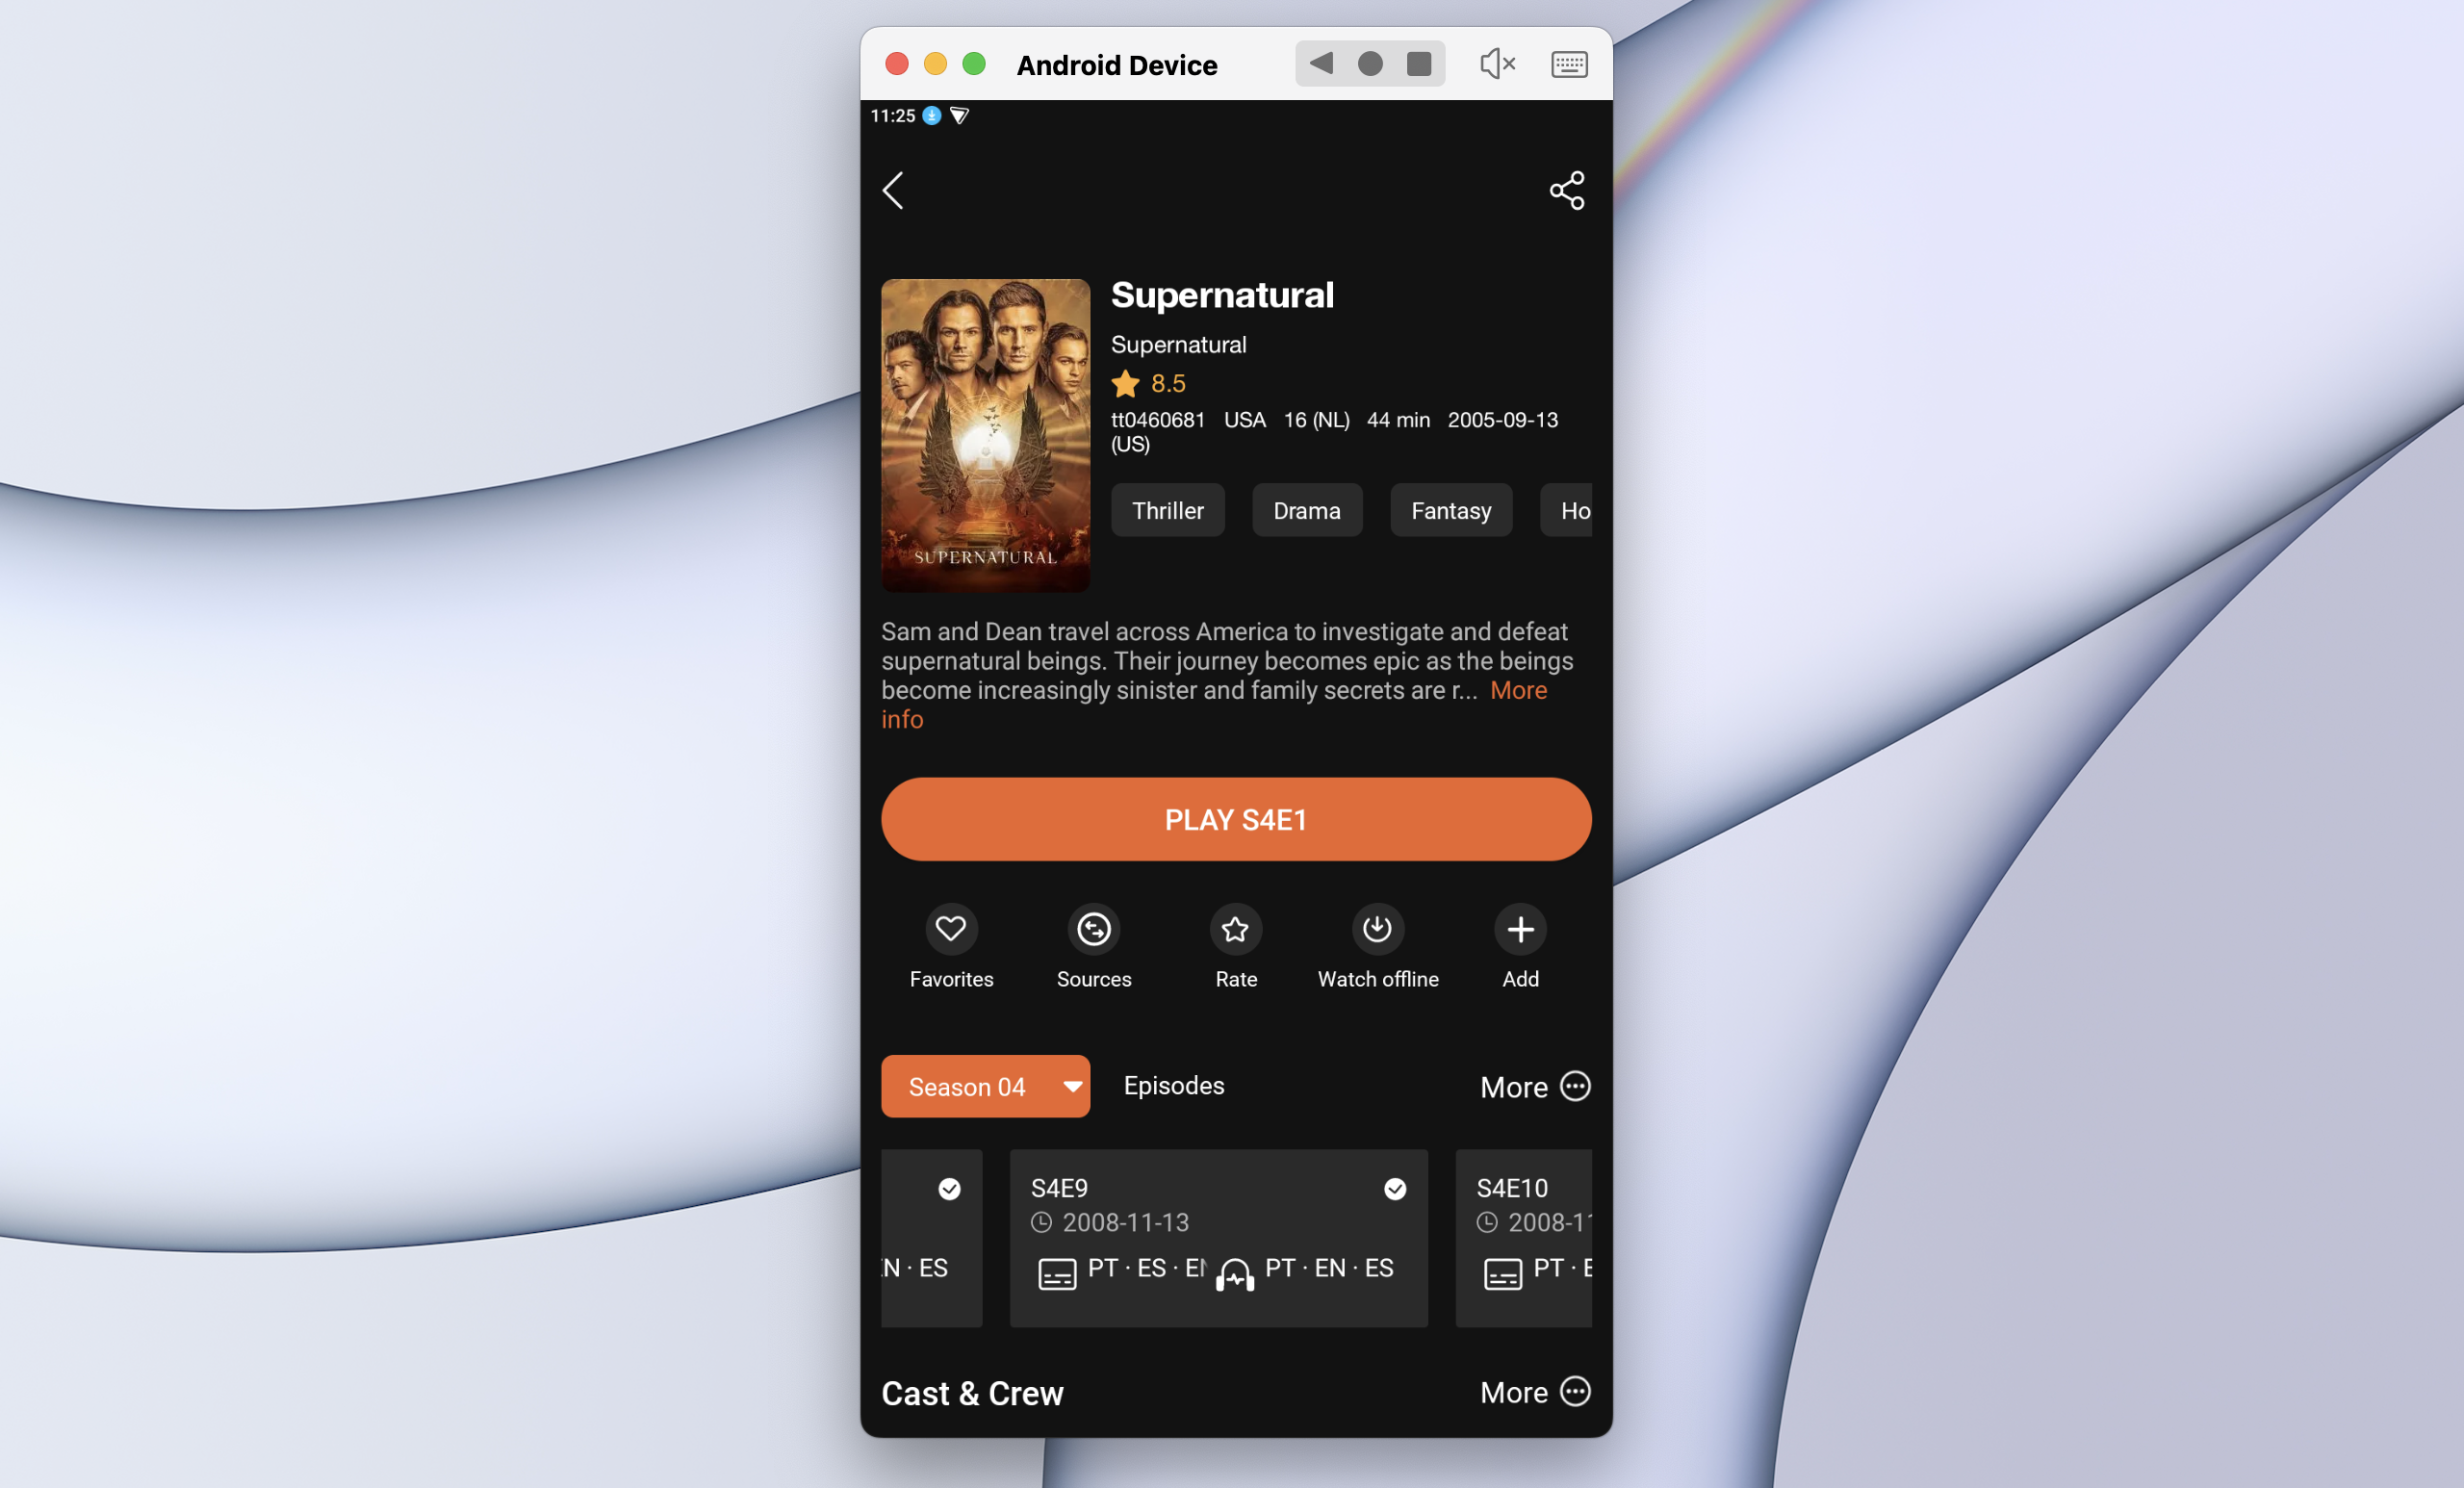 Use My Family Cinema on Mac: Watch your fav movies and TV shows online